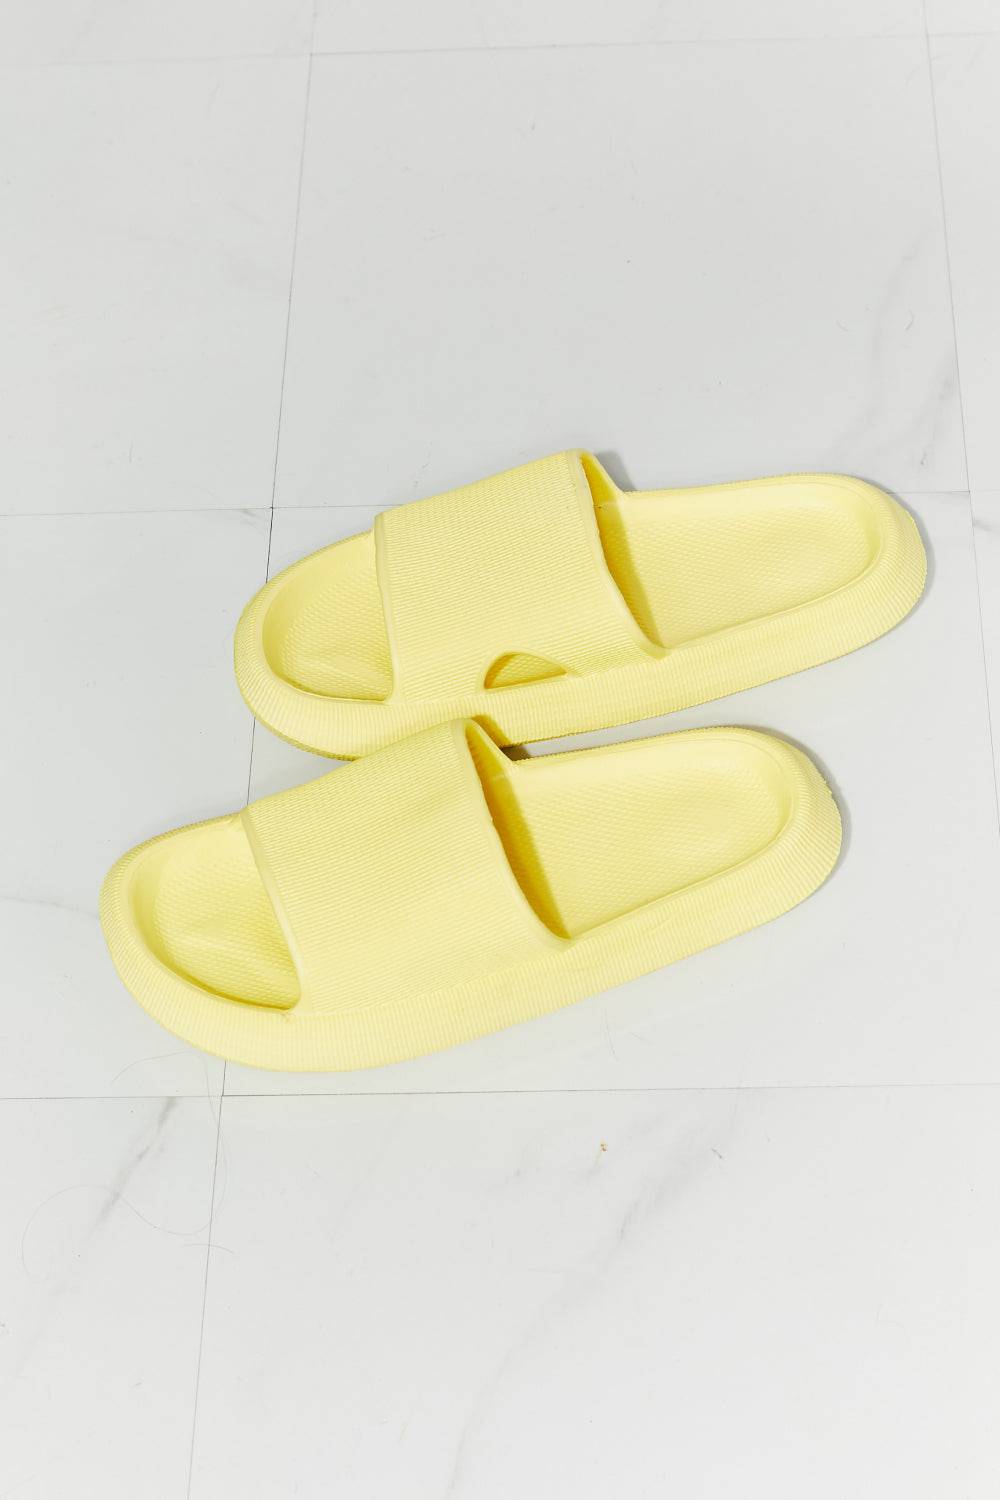 Arms Around Me Open Toe Slide in Yellow - Fall in Love with the Ultimate Romance of Comfort and Style - Indulge Yourself Today - Guy Christopher